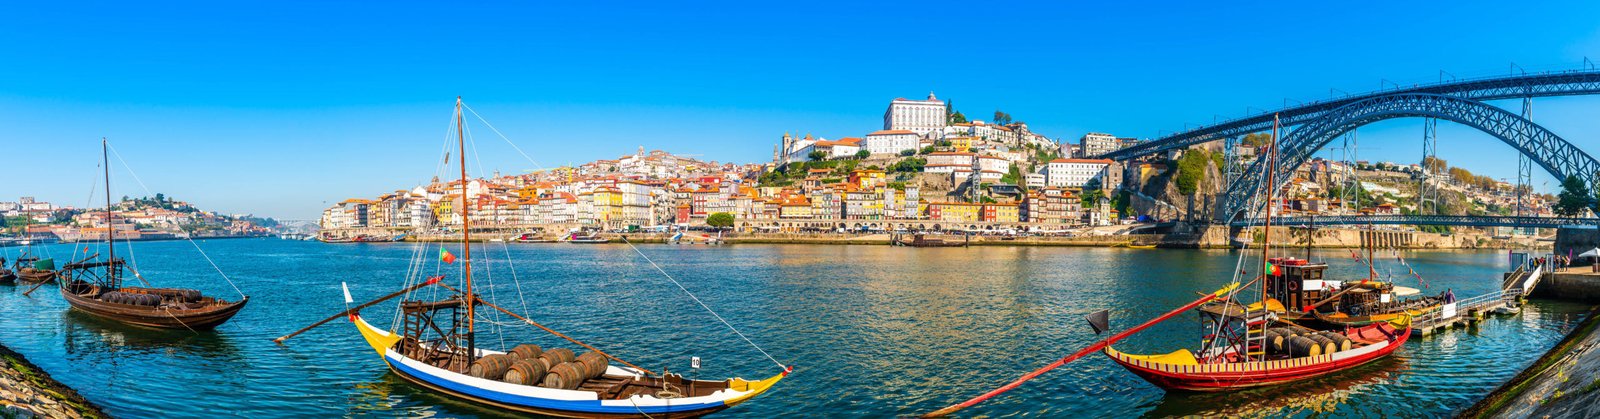 AdobeStock_296896788-1-scaled Why Invest in Portugal?